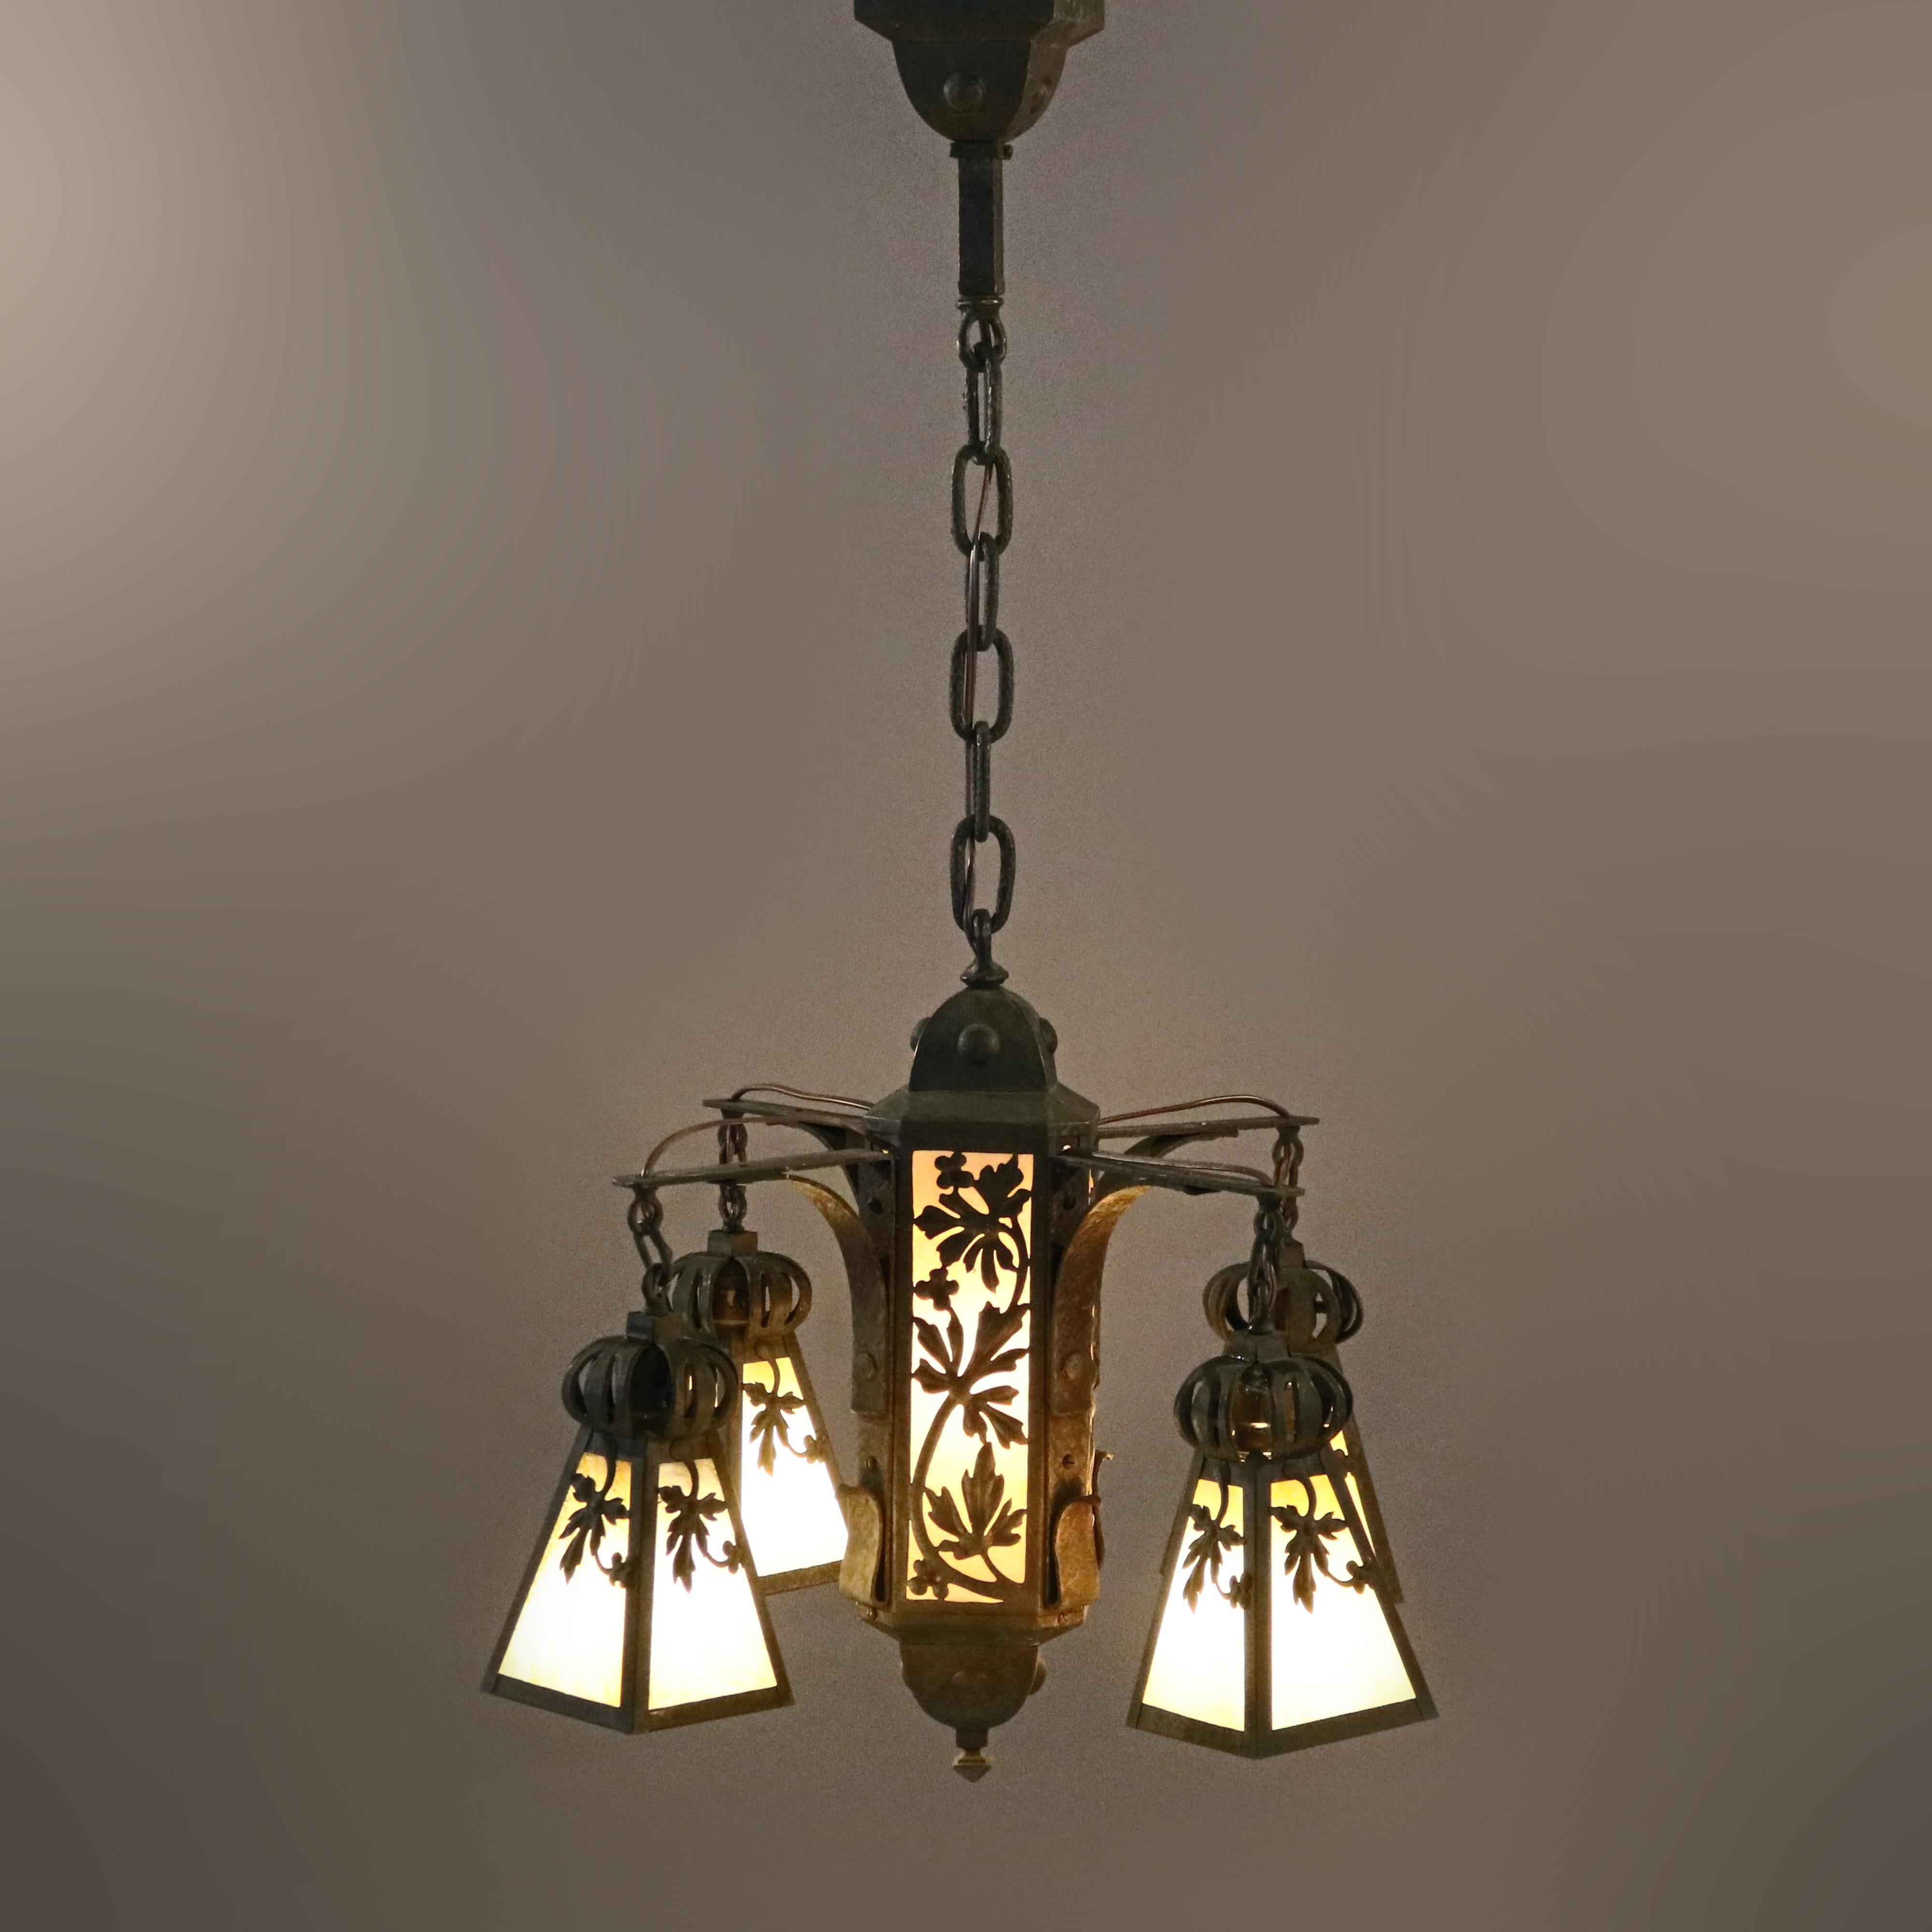 An antique Arts & Crafts chandelier offers central light with four flared drop lights each having hammered metal frames with cut-out foliate design and housing slag glass panels, c1920

Measures - 37.25'' H x 21'' W x 21.25'' D.

Catalogue Note: Ask